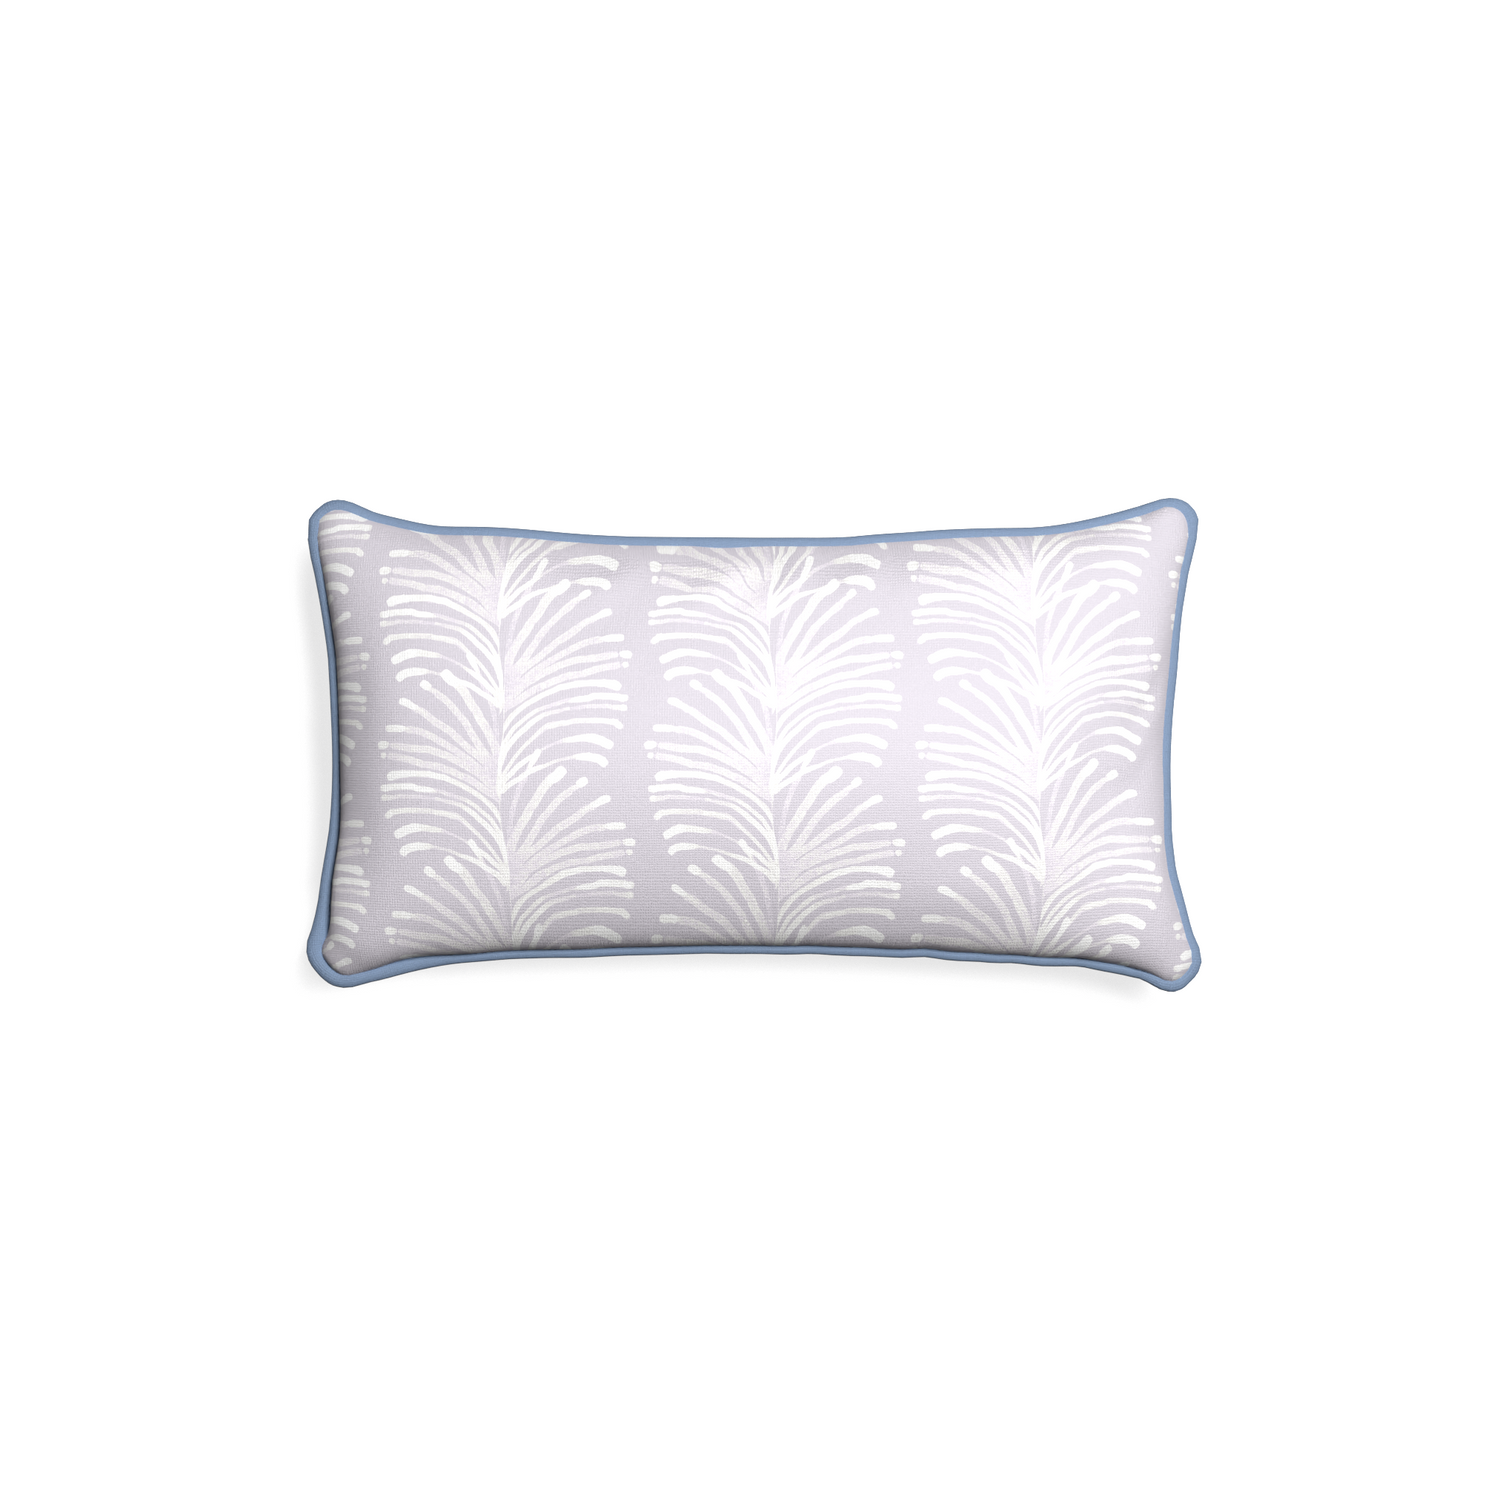 Petite-lumbar emma lavender custom lavender botanical stripepillow with sky piping on white background